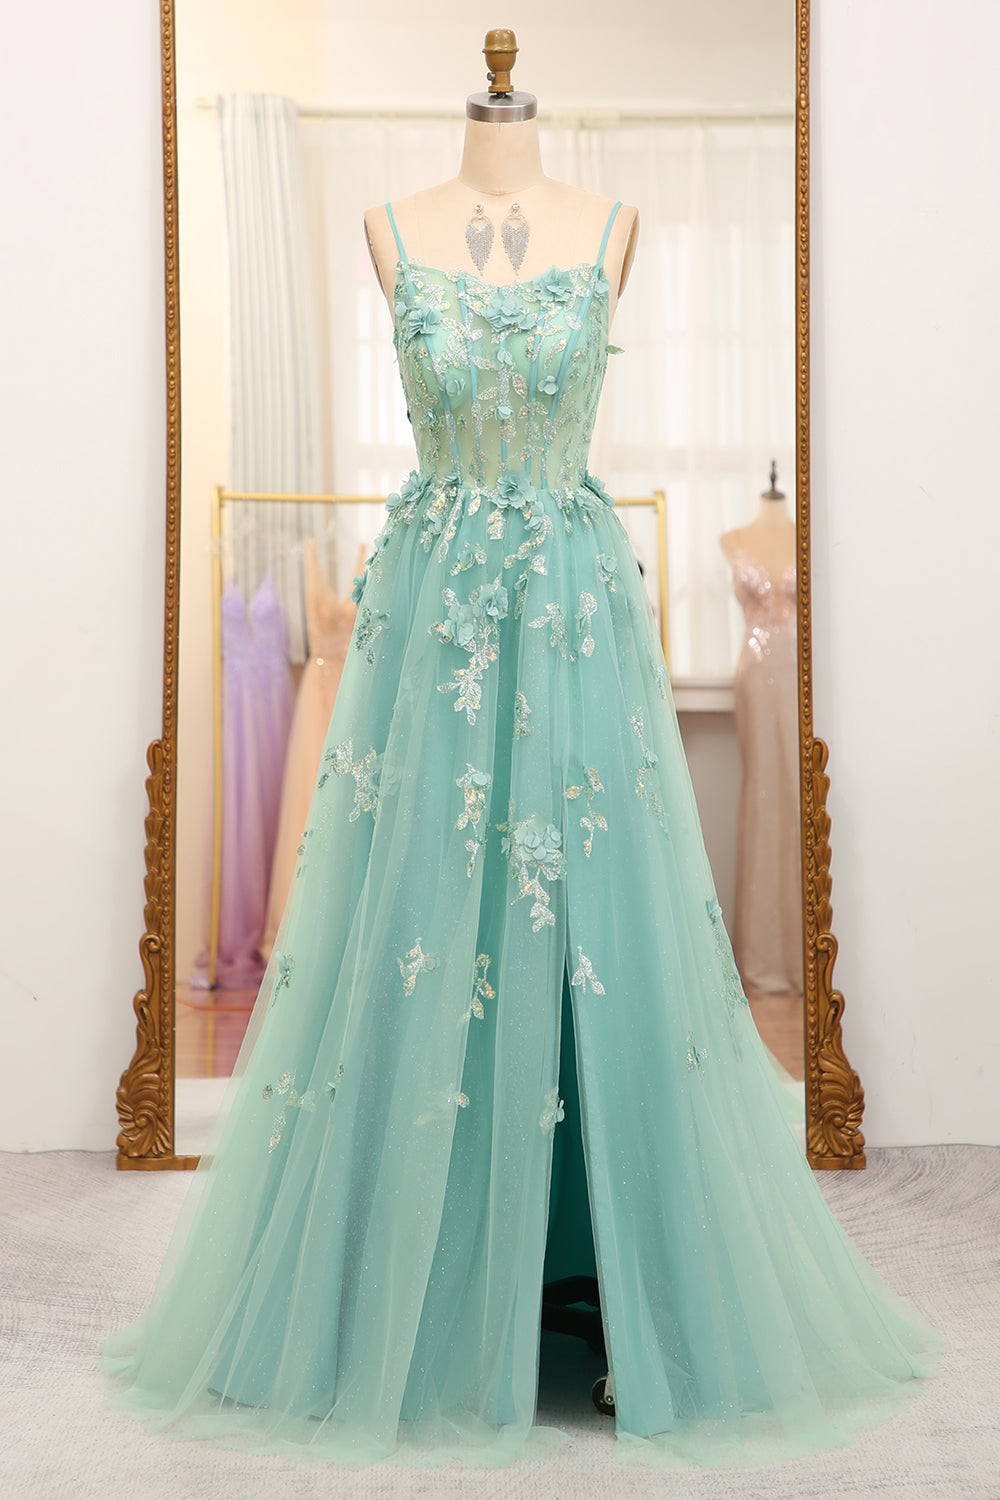 Green A-Line Spaghetti Straps Long Sparkly Prom Dress With Appliques